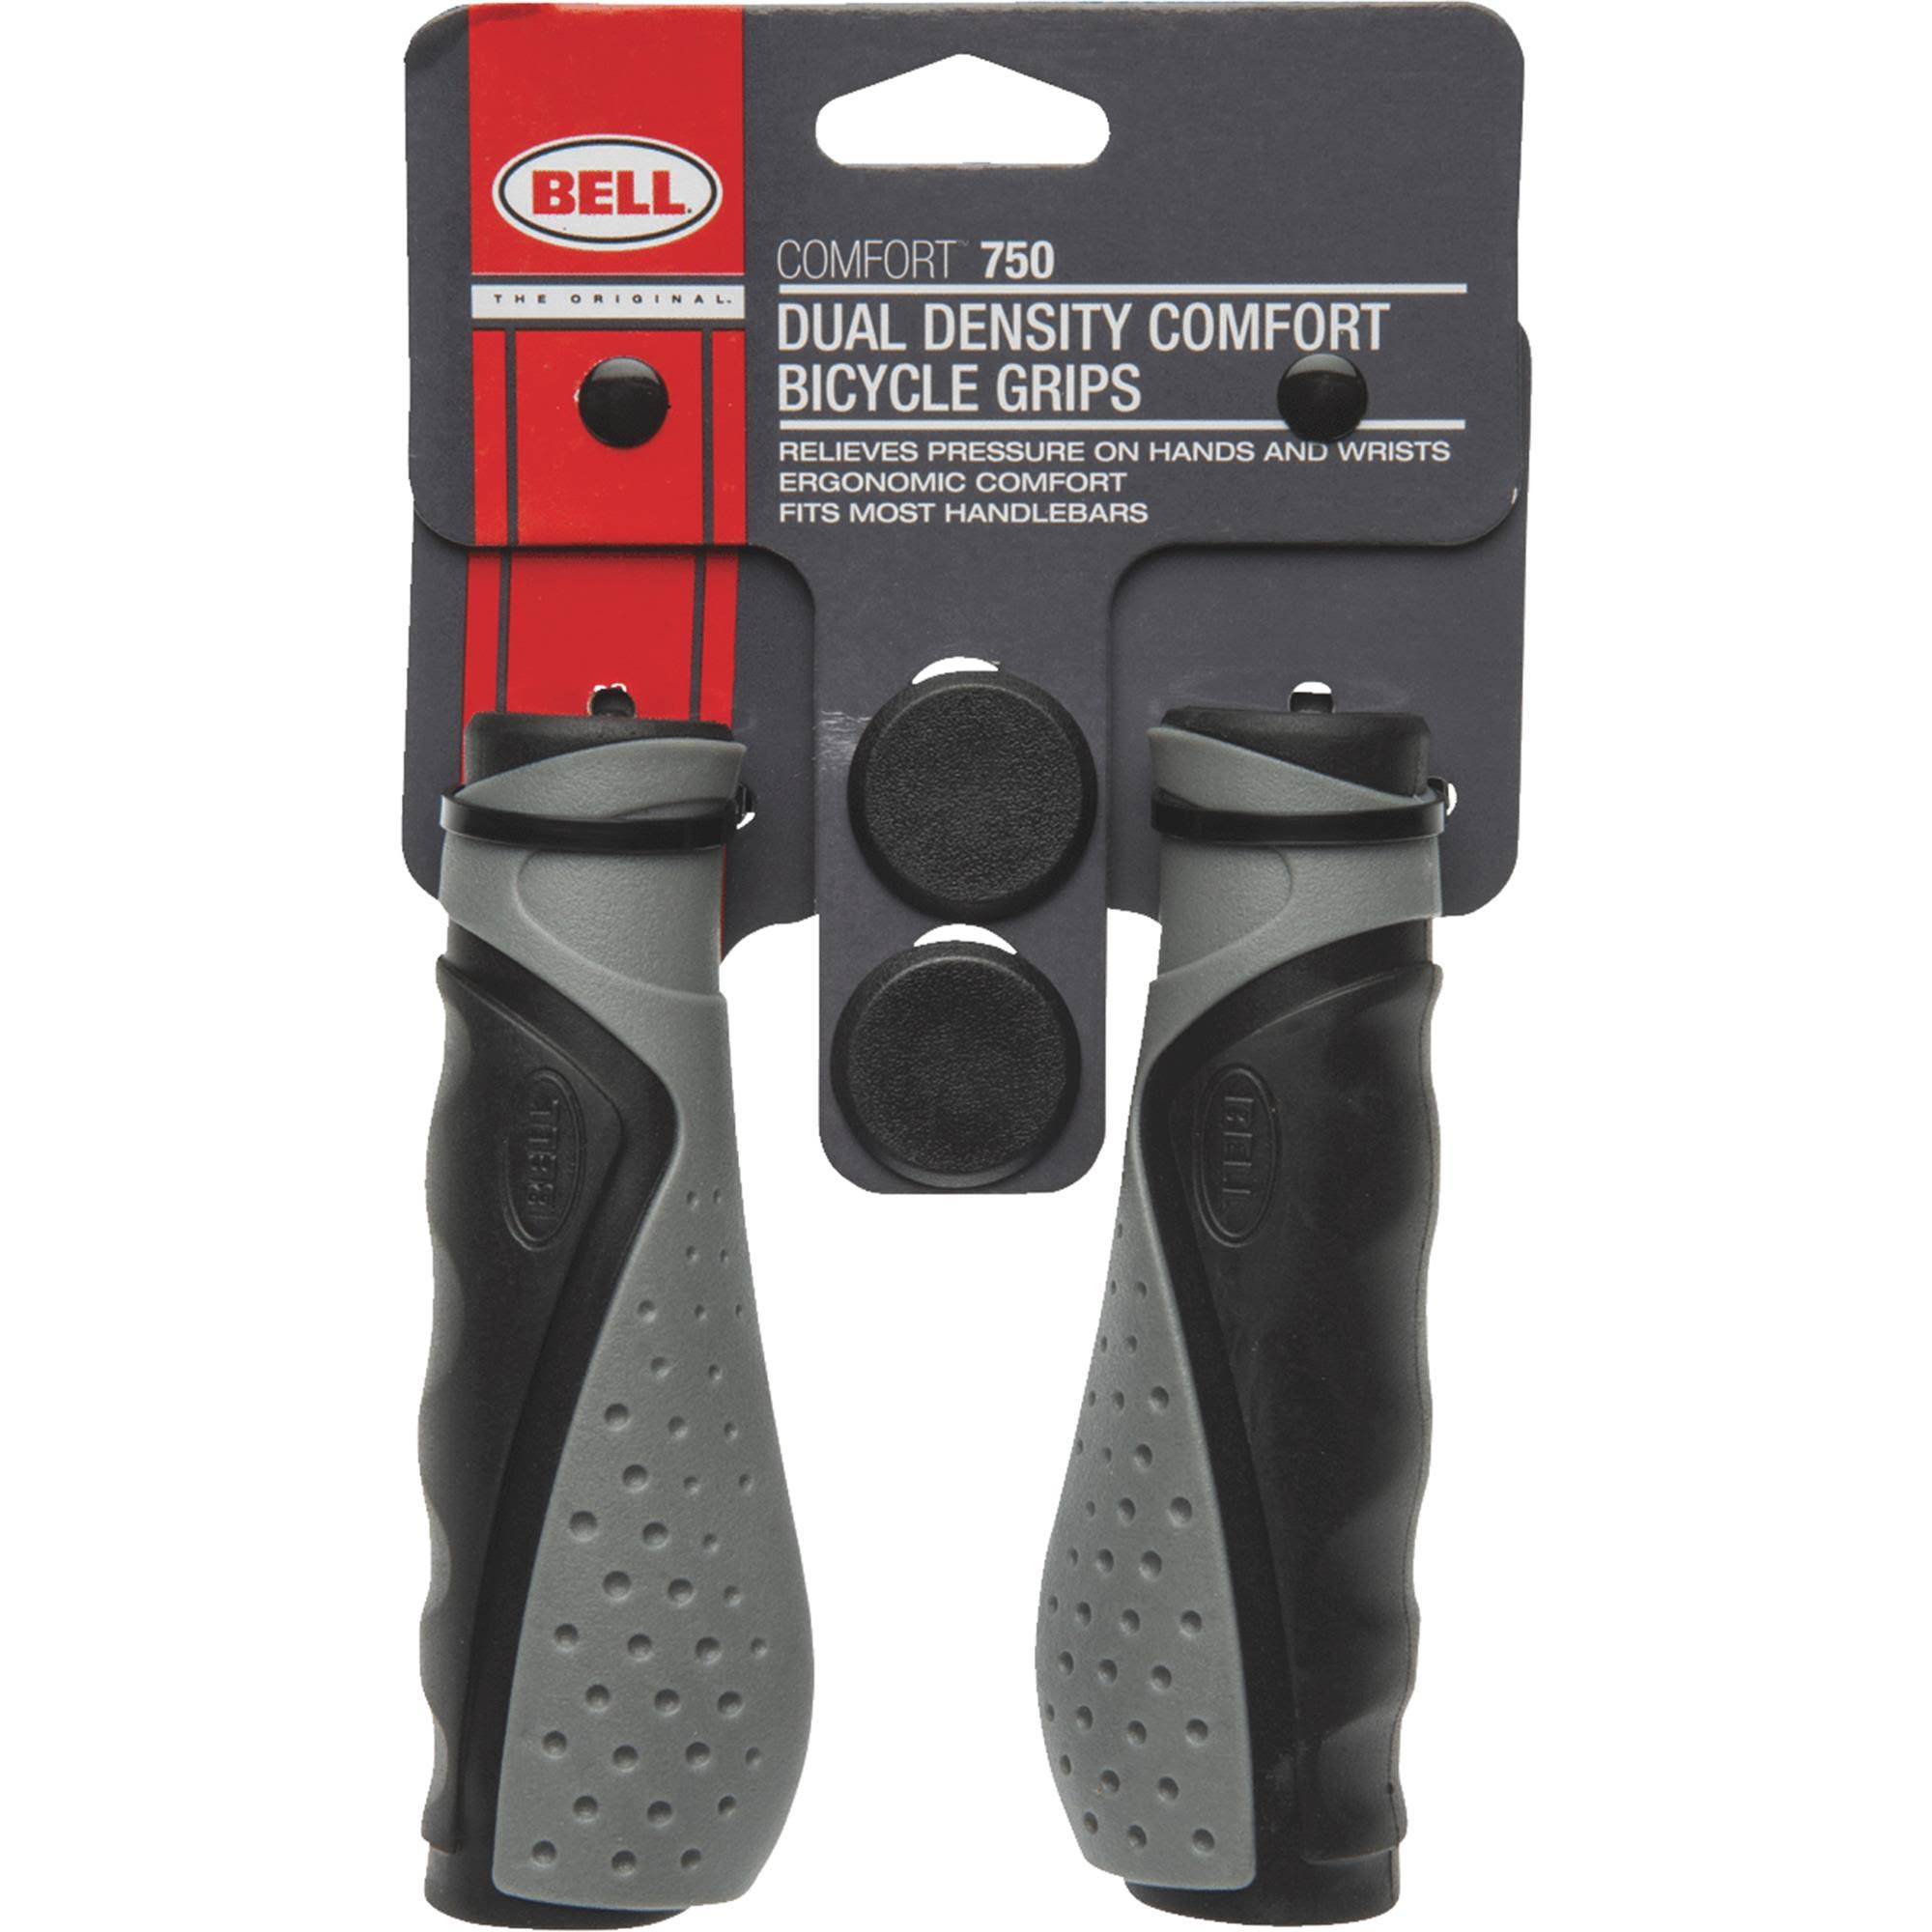 Bell Sports Comfort 700 Bicycle Handle Grips - Black